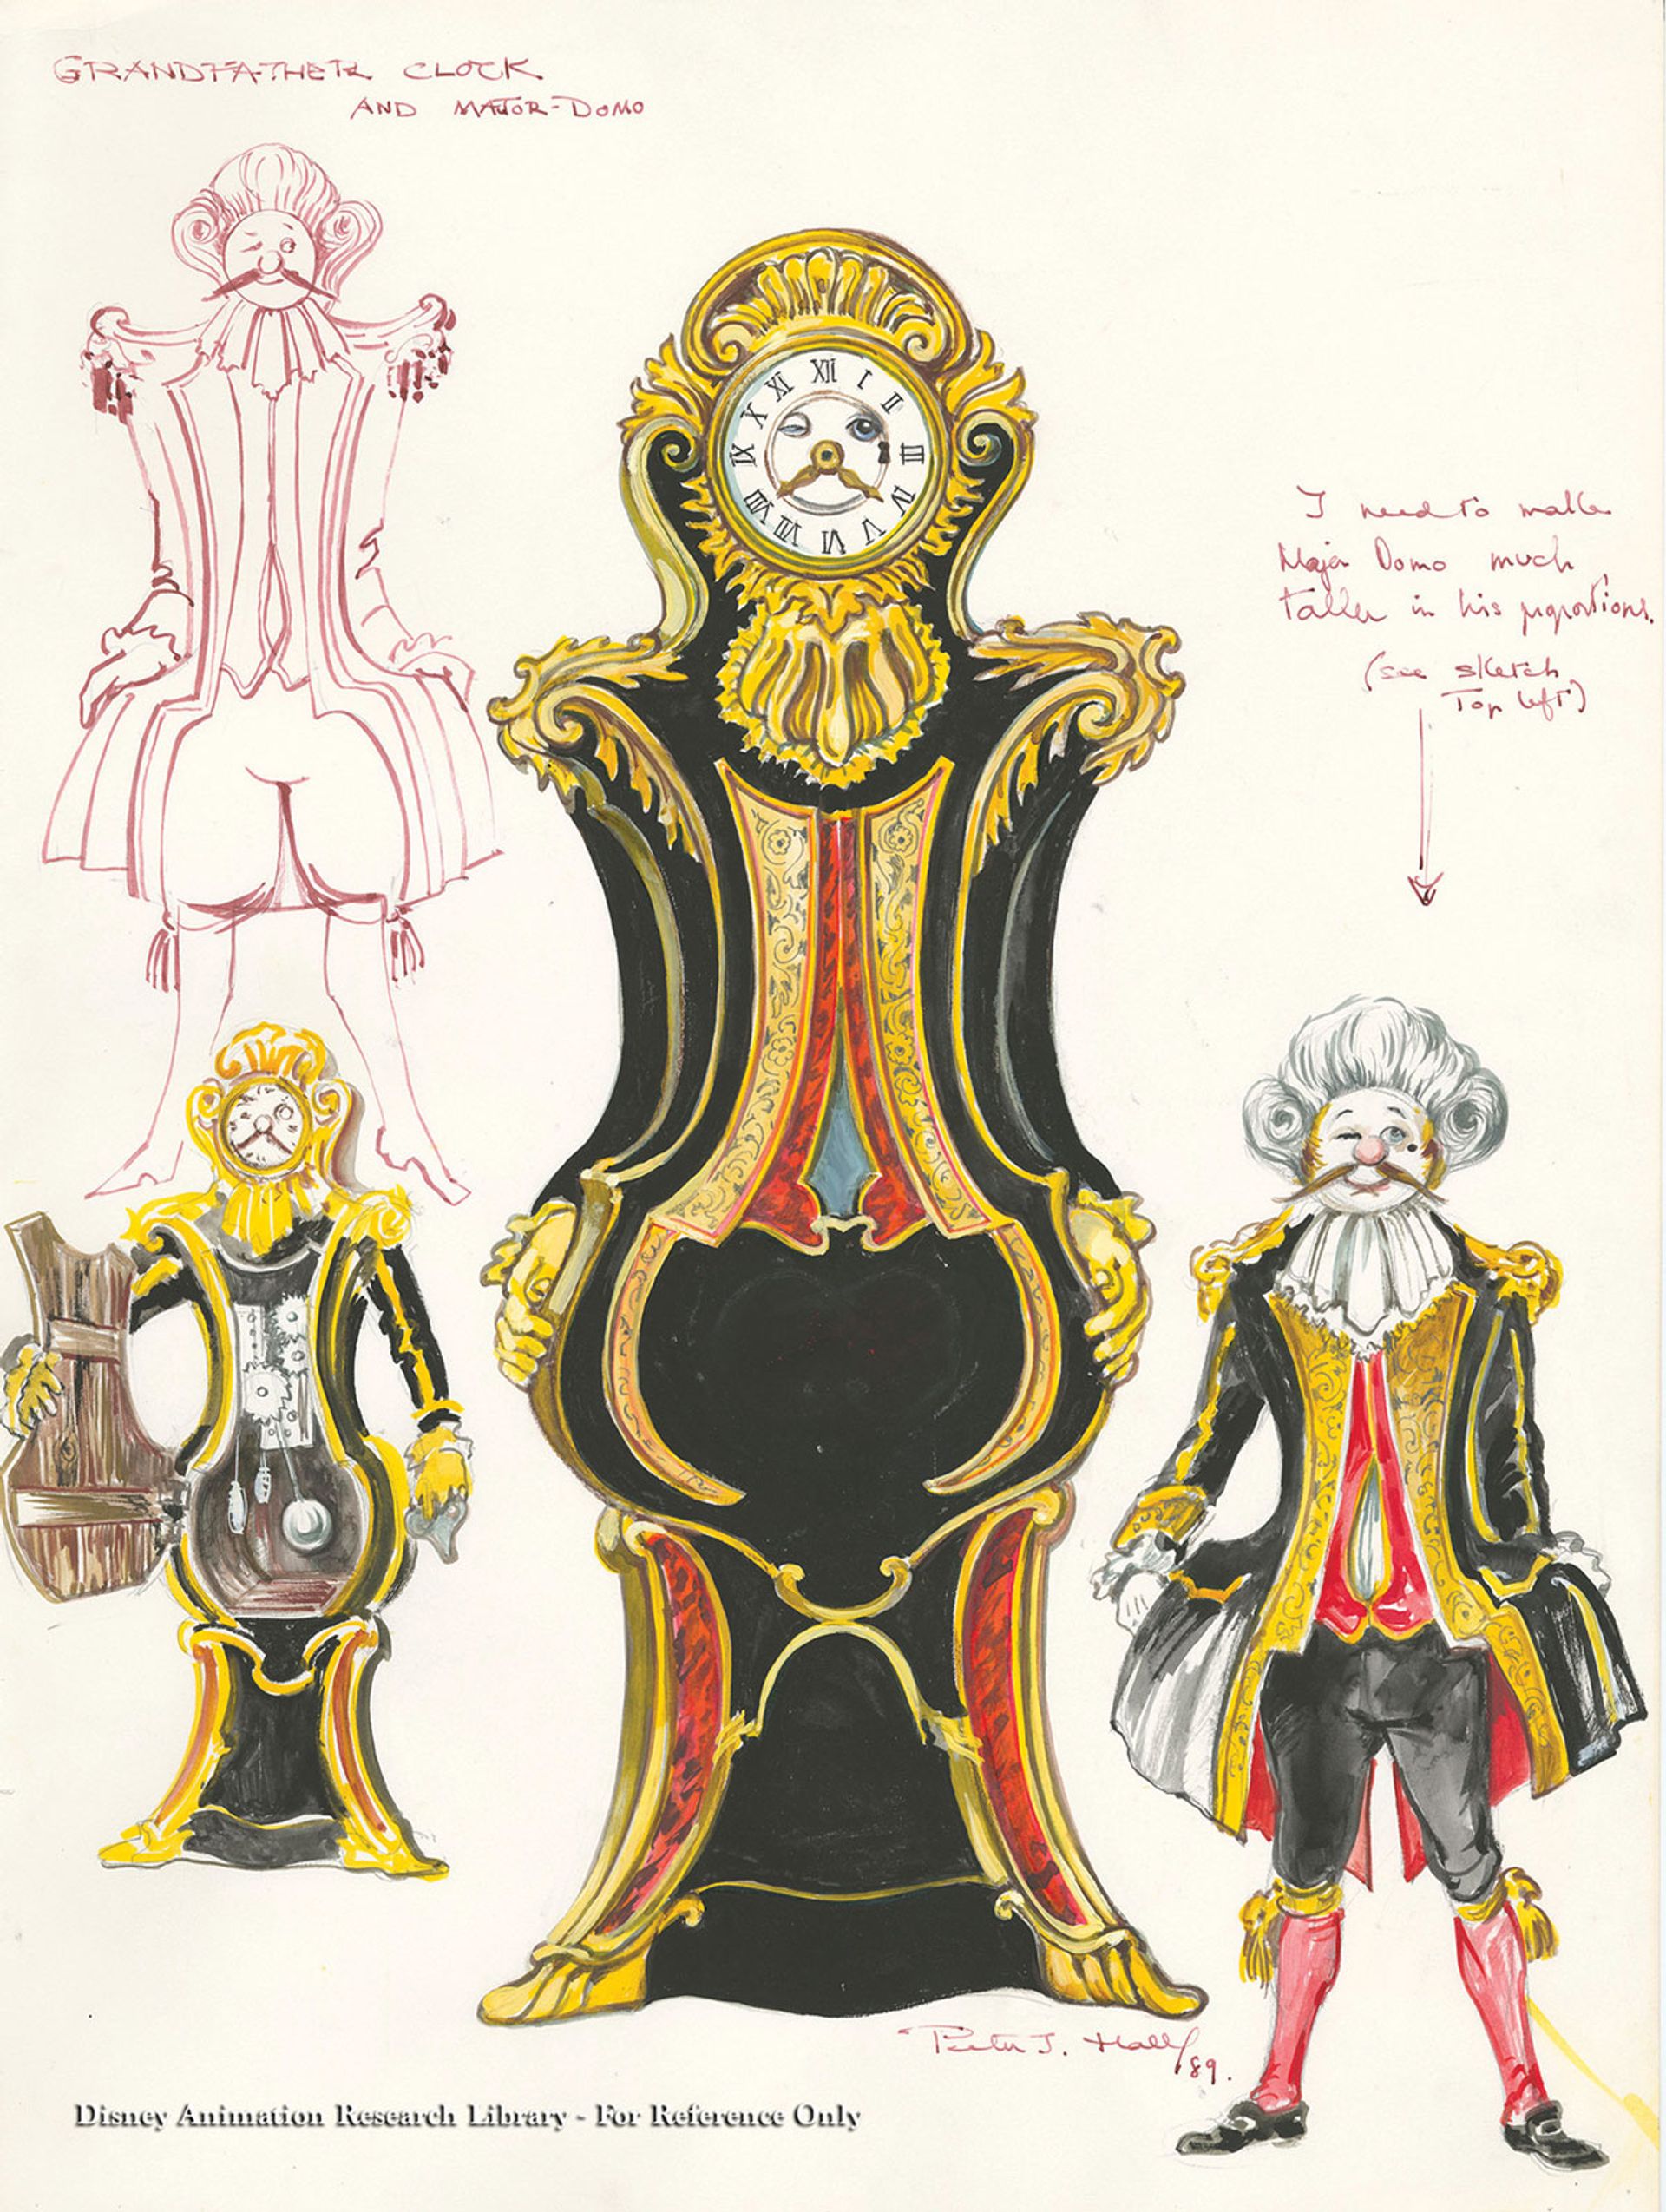 Peter Hall’s 1991 concept art for the Disney film Beauty and the Beast Walt Disney Animation Research Library